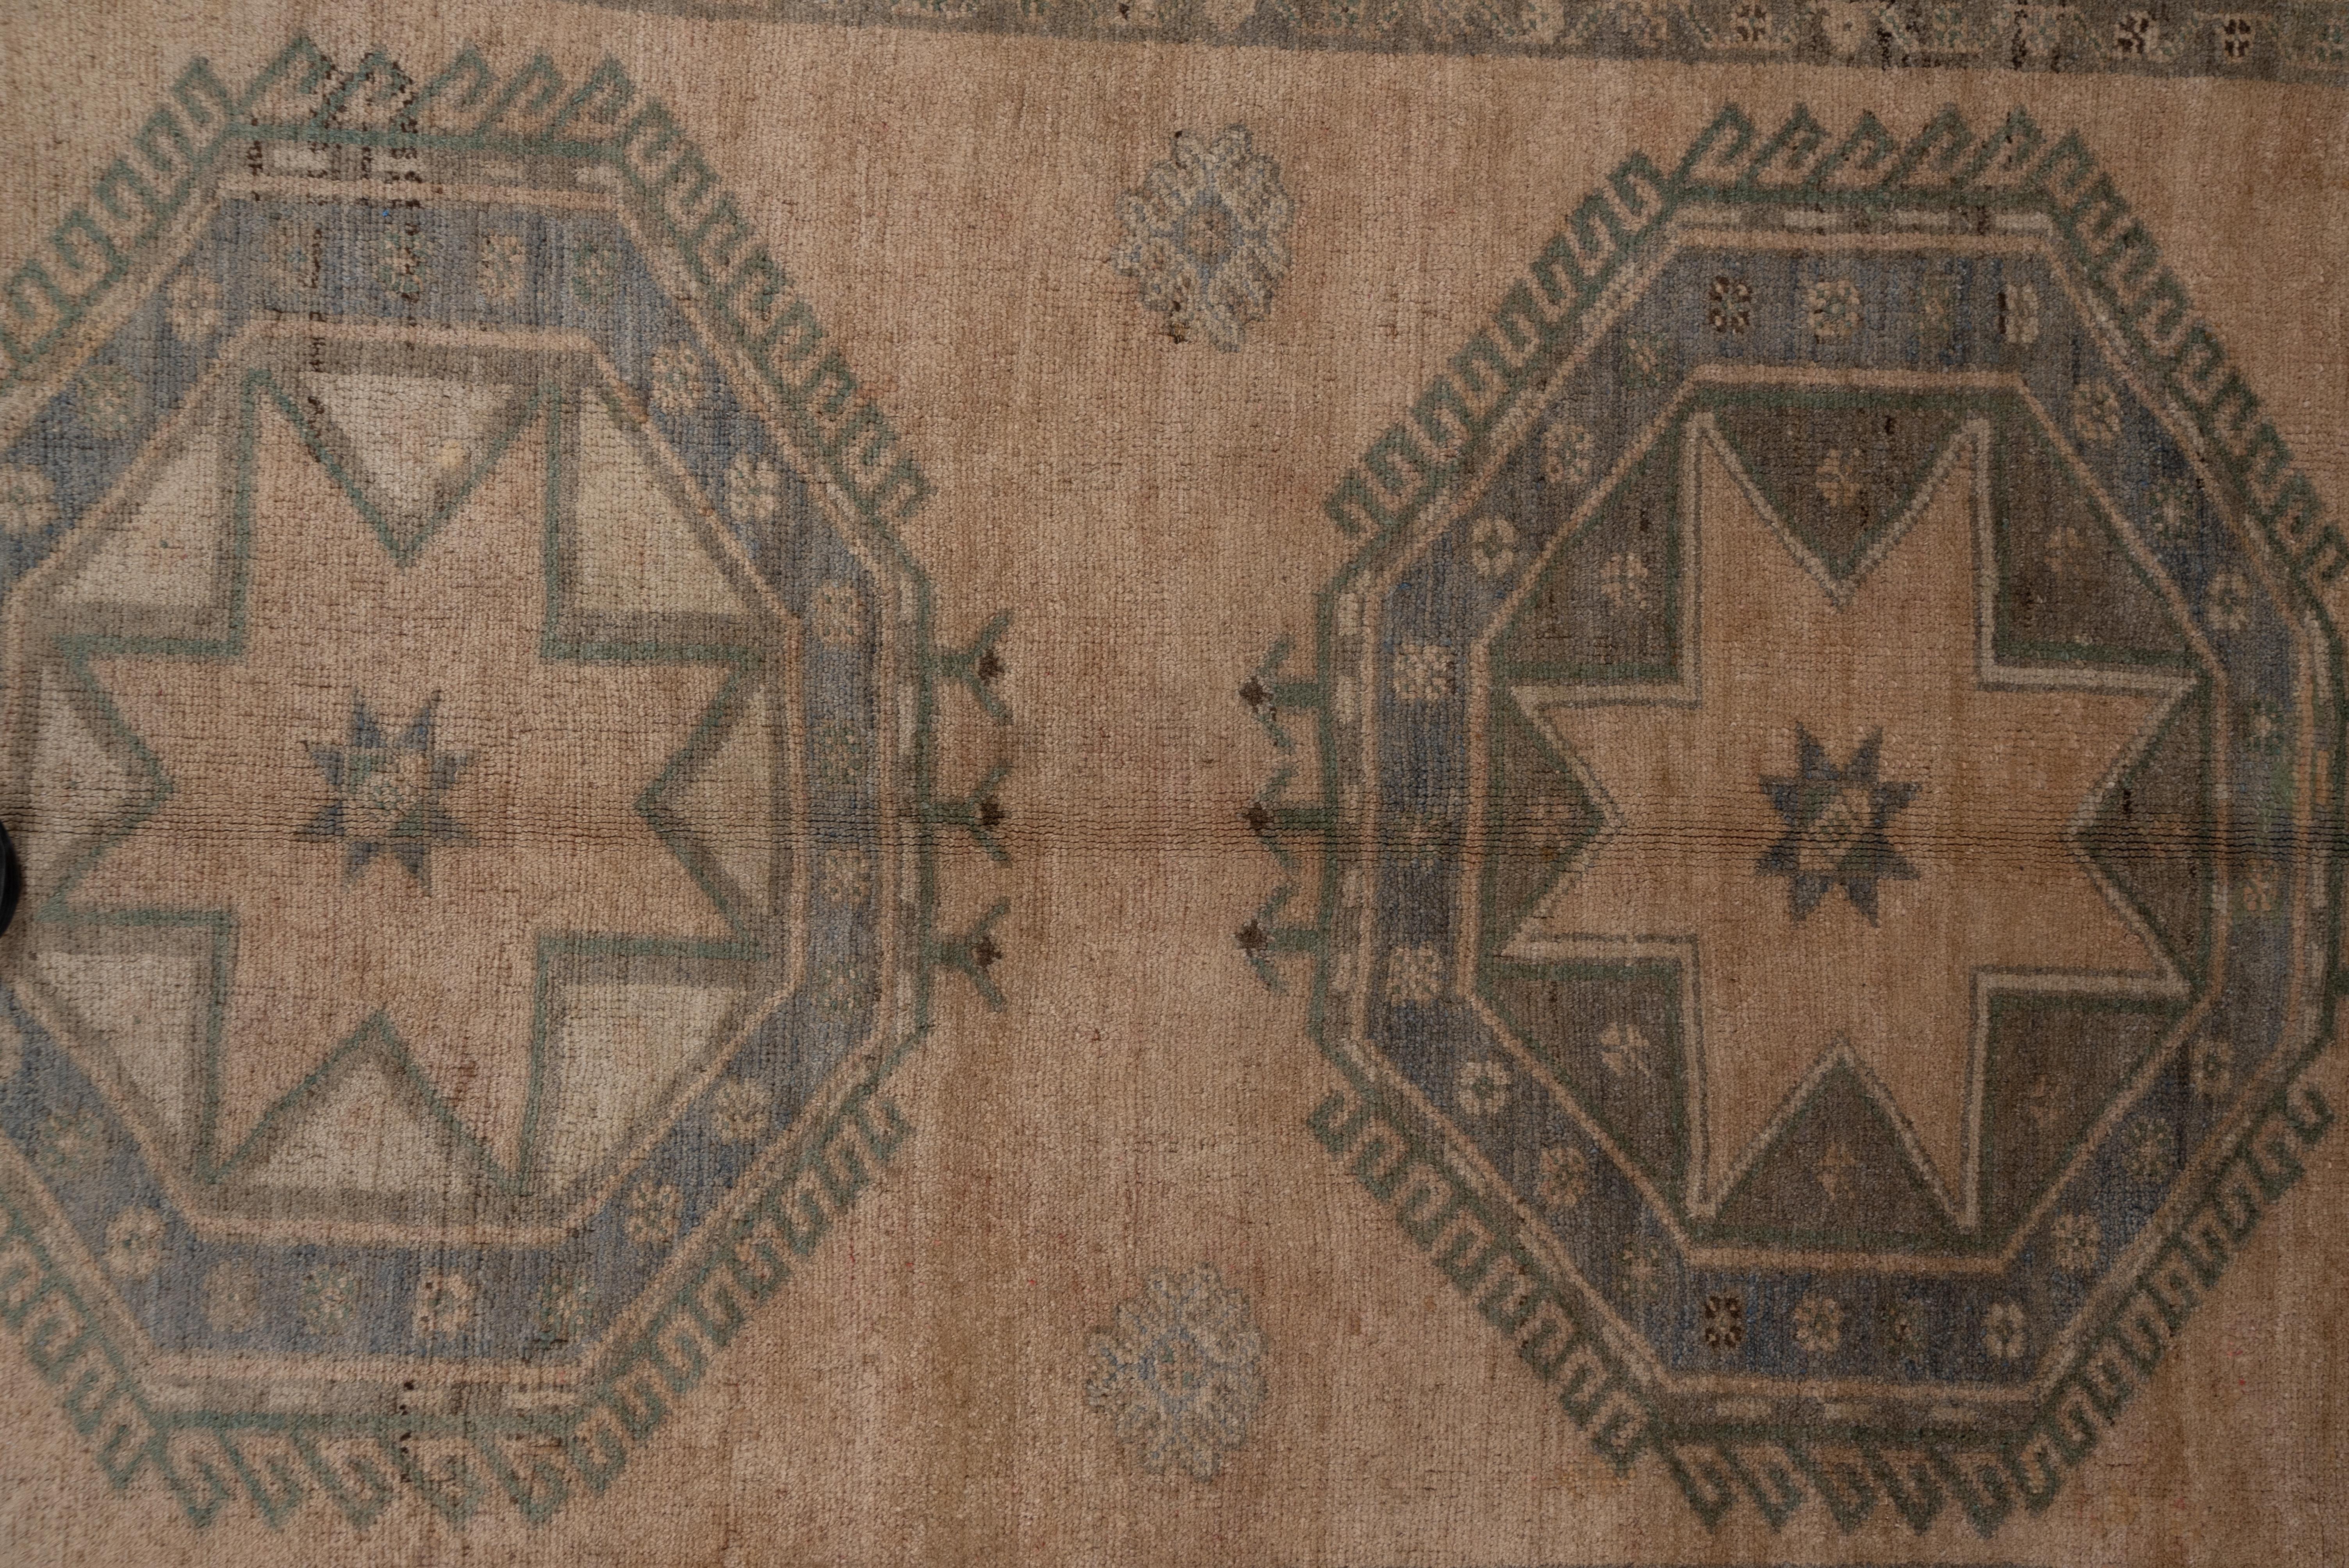 Antique Turkish Oushak Carpet, Circa 1930s In Good Condition For Sale In New York, NY